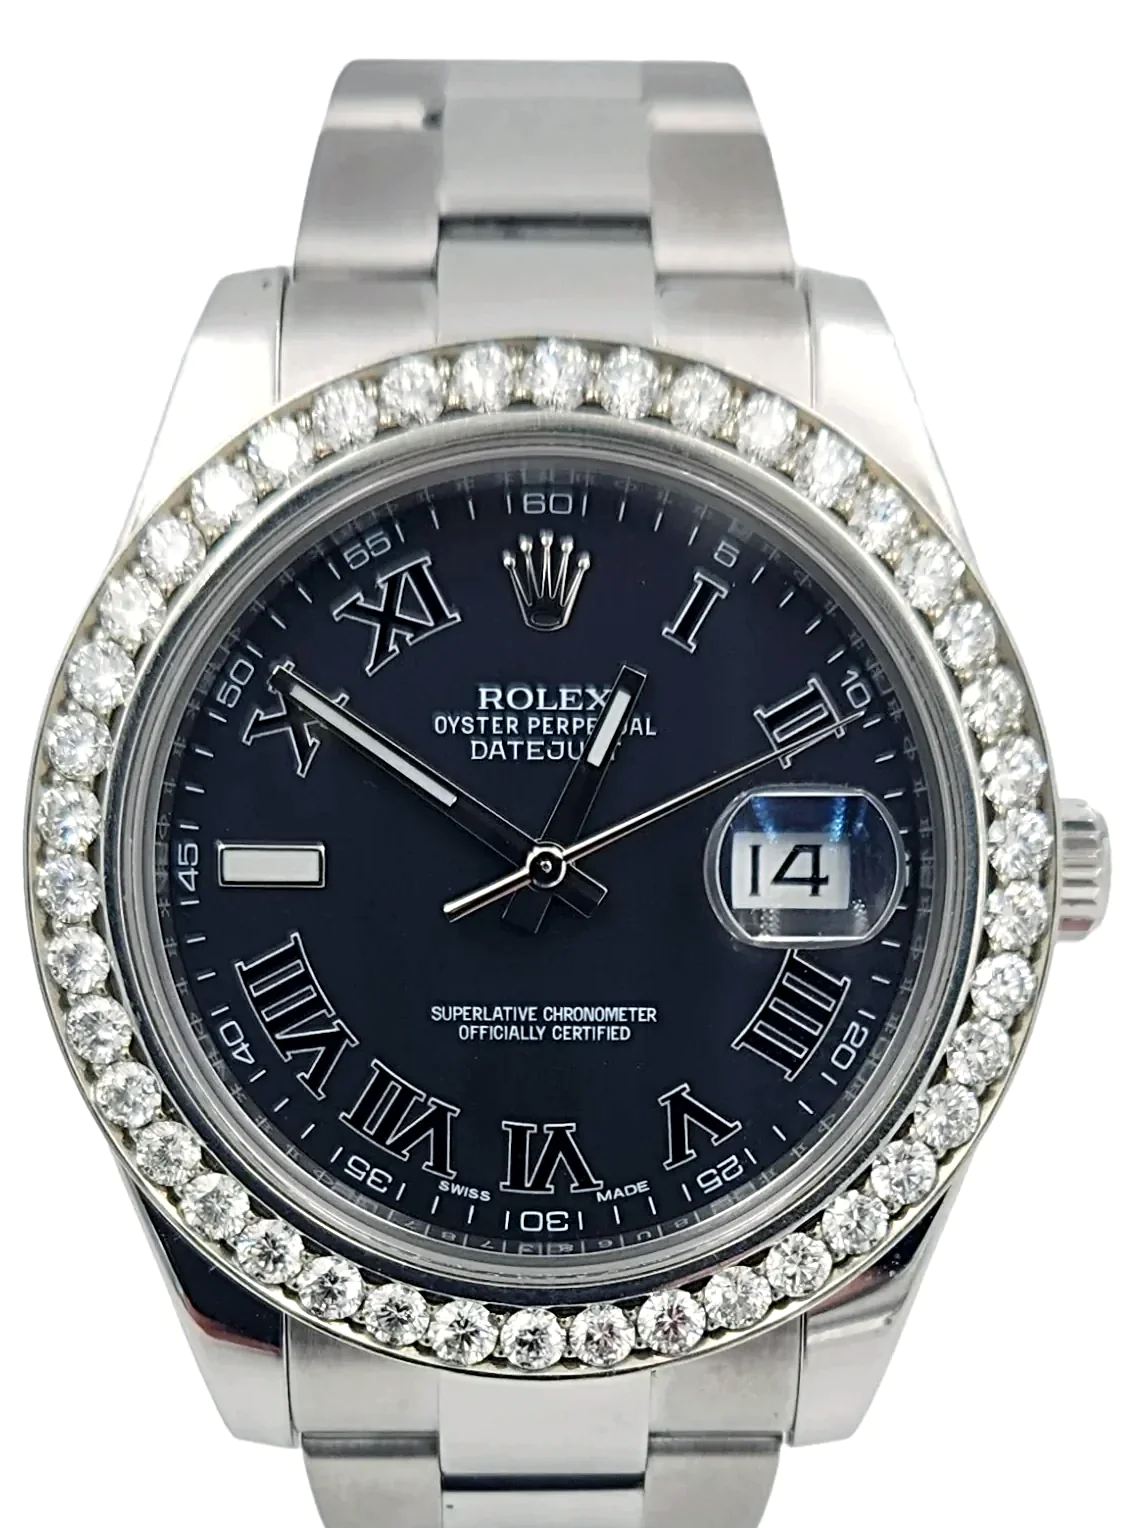 Men's Rolex 41mm DateJust Stainless Steel Watch with Black Roman Dial and Diamond Bezel. (Pre-Owned 116334)